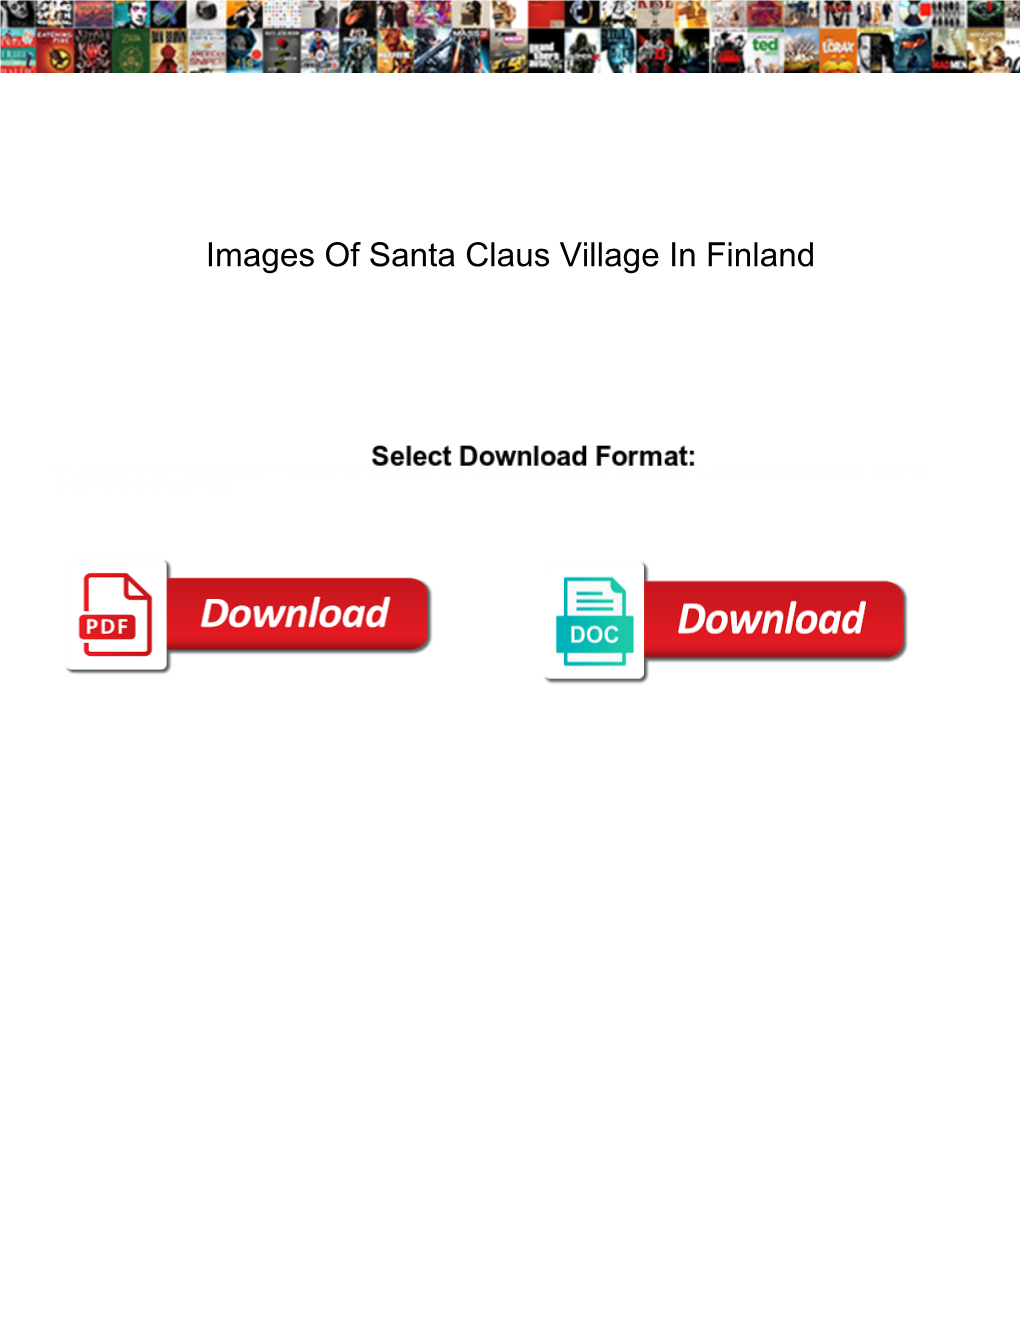 Images of Santa Claus Village in Finland